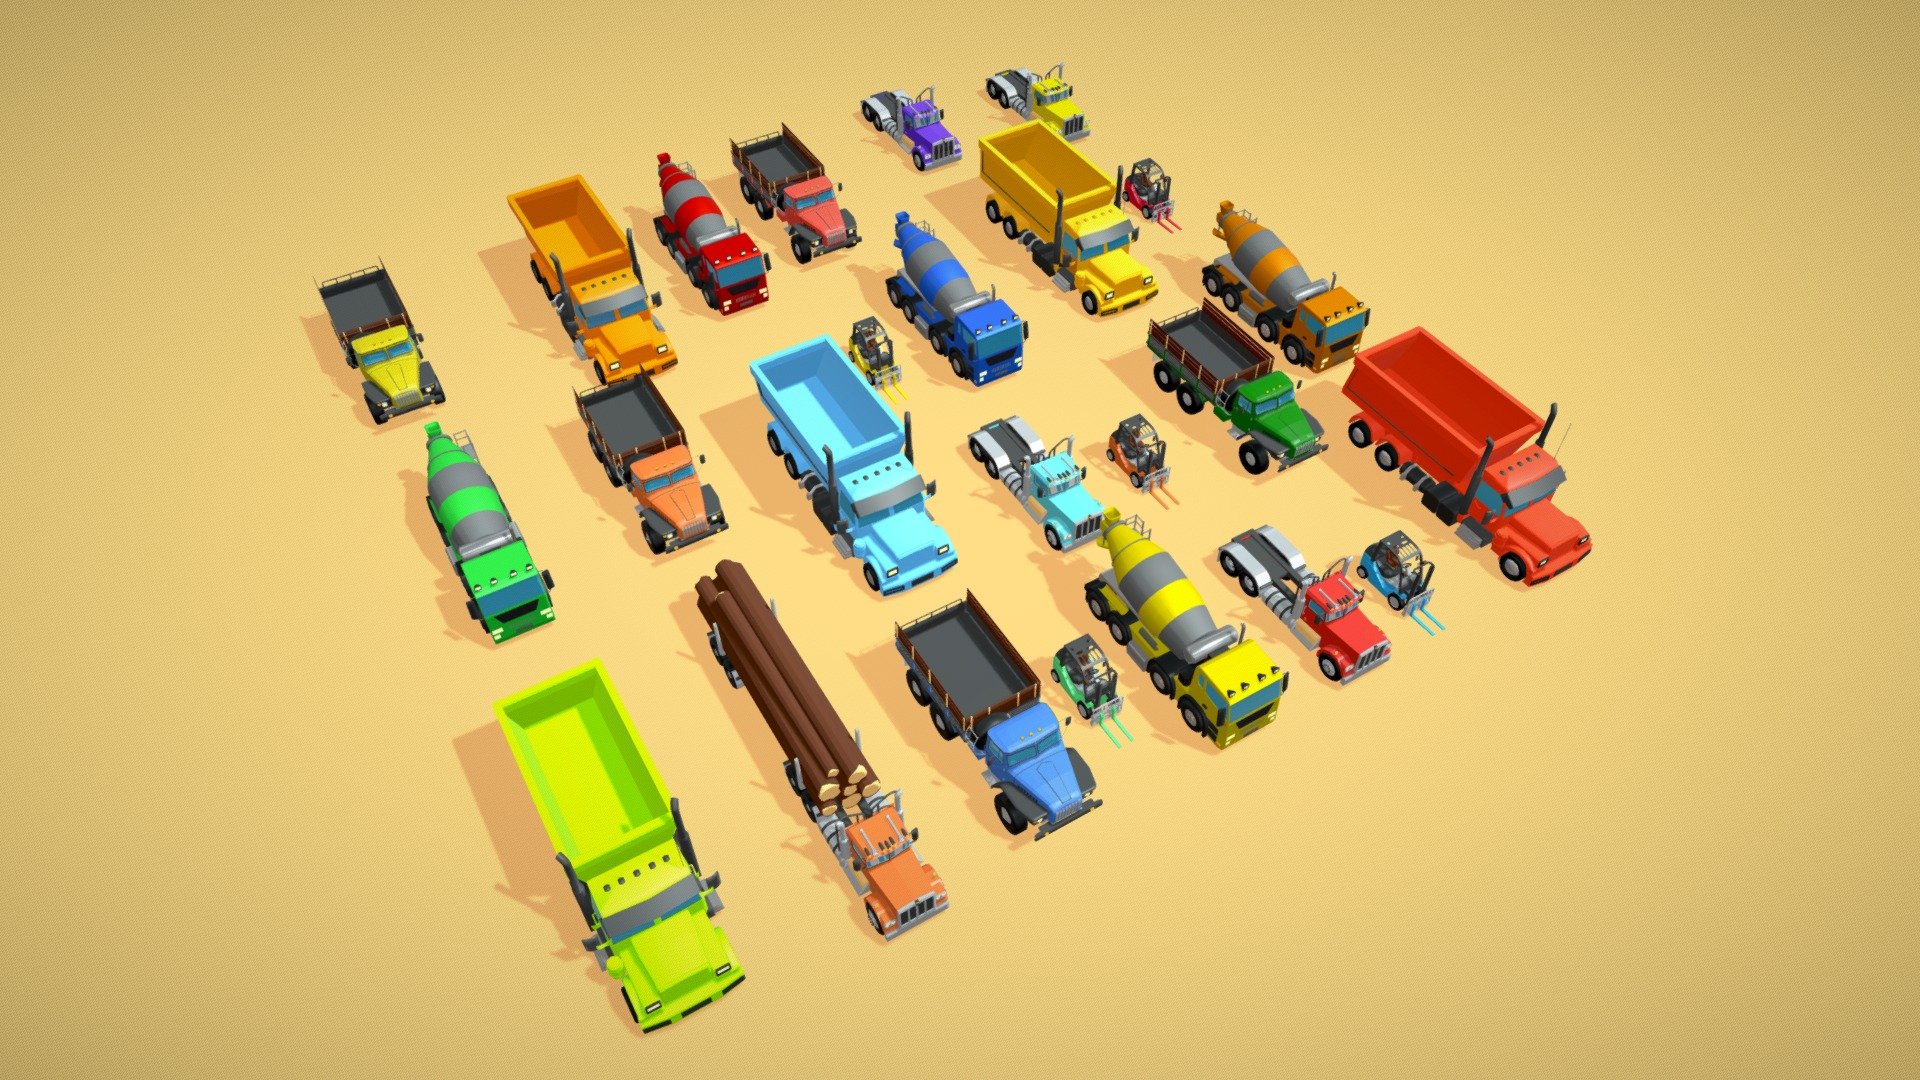 Created 25 very nice Multi Purpose Trucks in a single pack.
All the models are originally prepared in Blender.
Package includes the following file formats: Blend, Obj, Glb

Enjoy this car pack. If you like it then add comments below 3d model